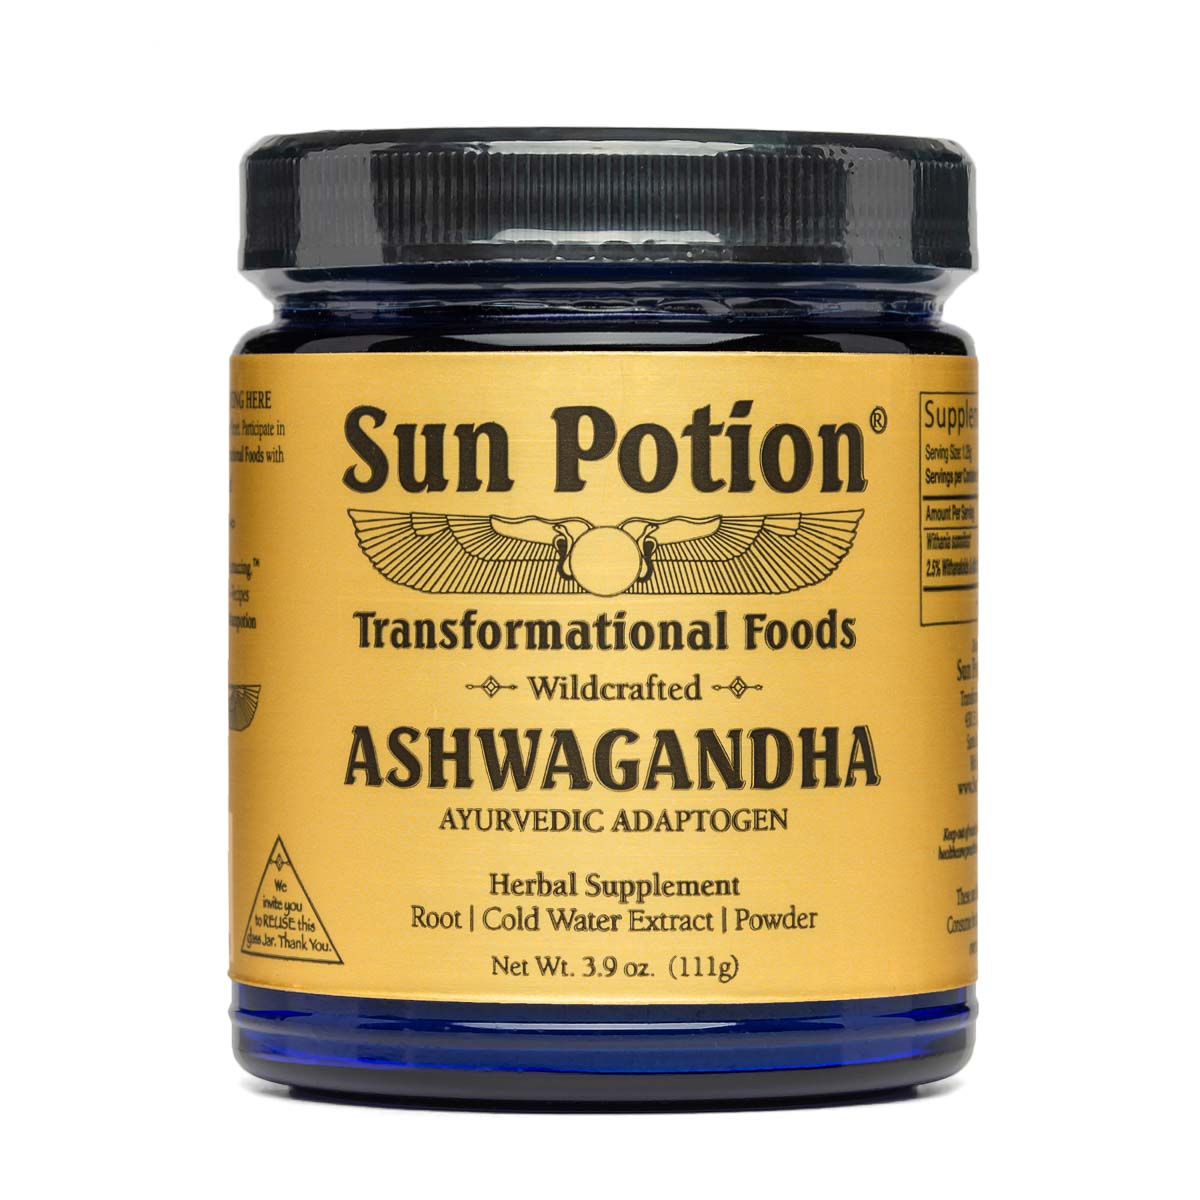 Ashwagandha Powder | Sun Potion | Raw Living UK | Tonic Herbs | Sun Potion Ashwagandha Powder is a known &amp; popular Ayurvedic Herb with a long use history. A powerful Adaptogen, It is often referred to as &quot;Indian Ginseng&quot;.